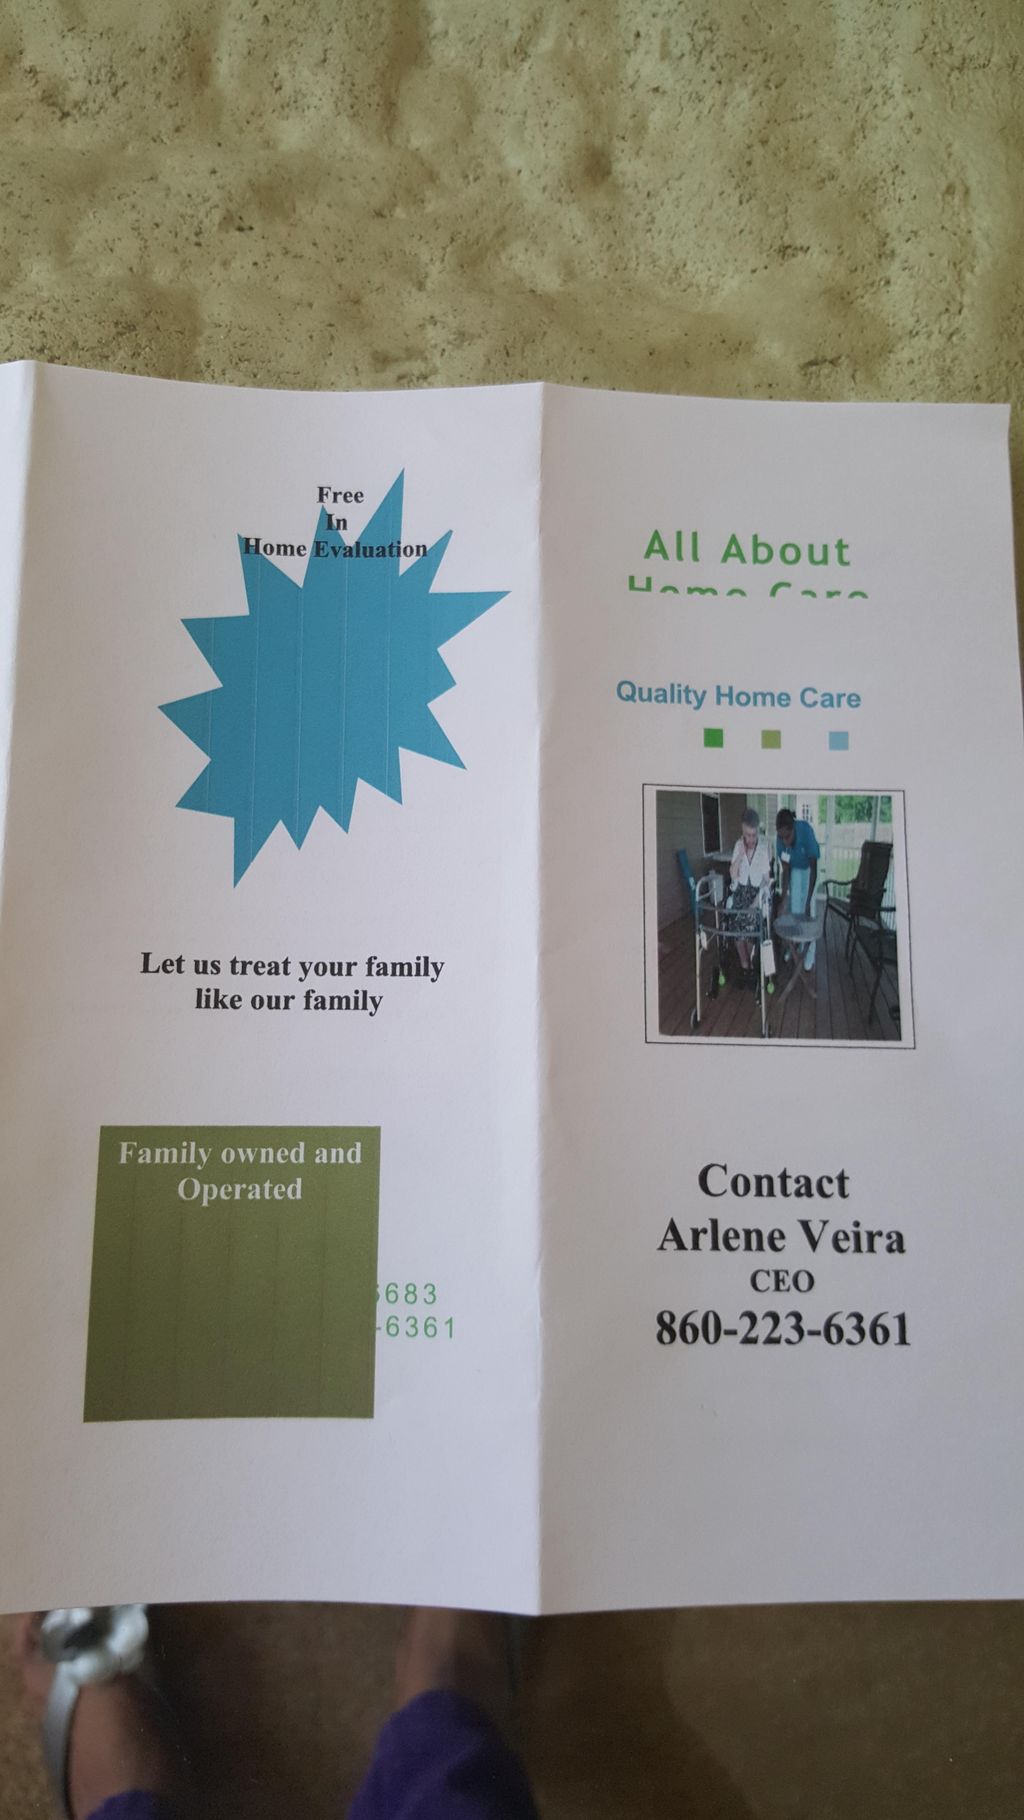 All About Home Care LLC